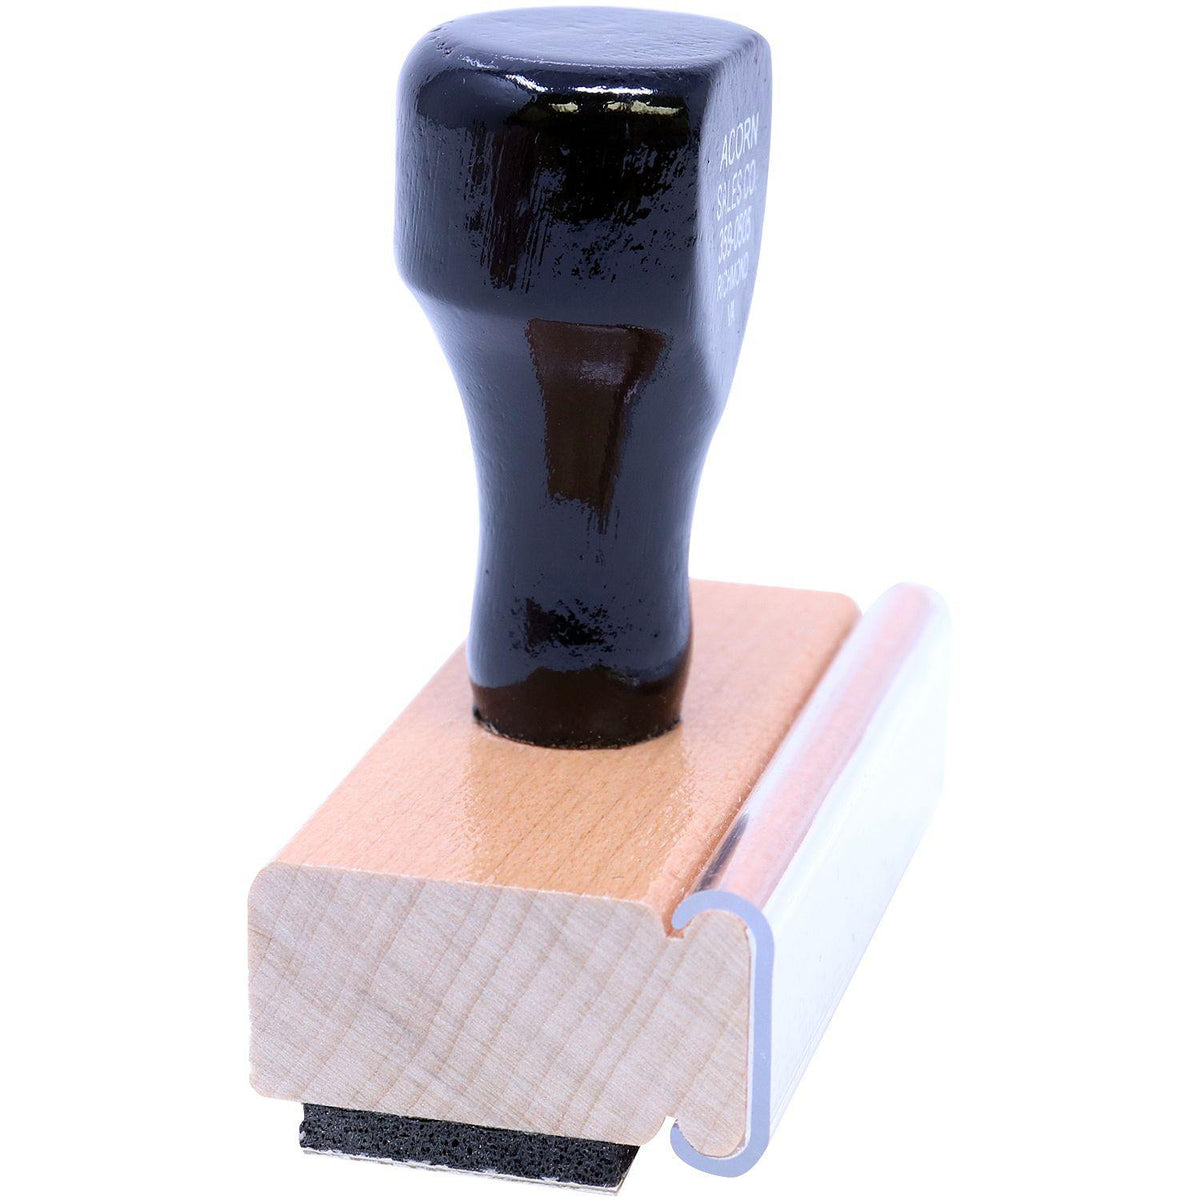 Side View of Ira Account Rubber Stamp at an Angle